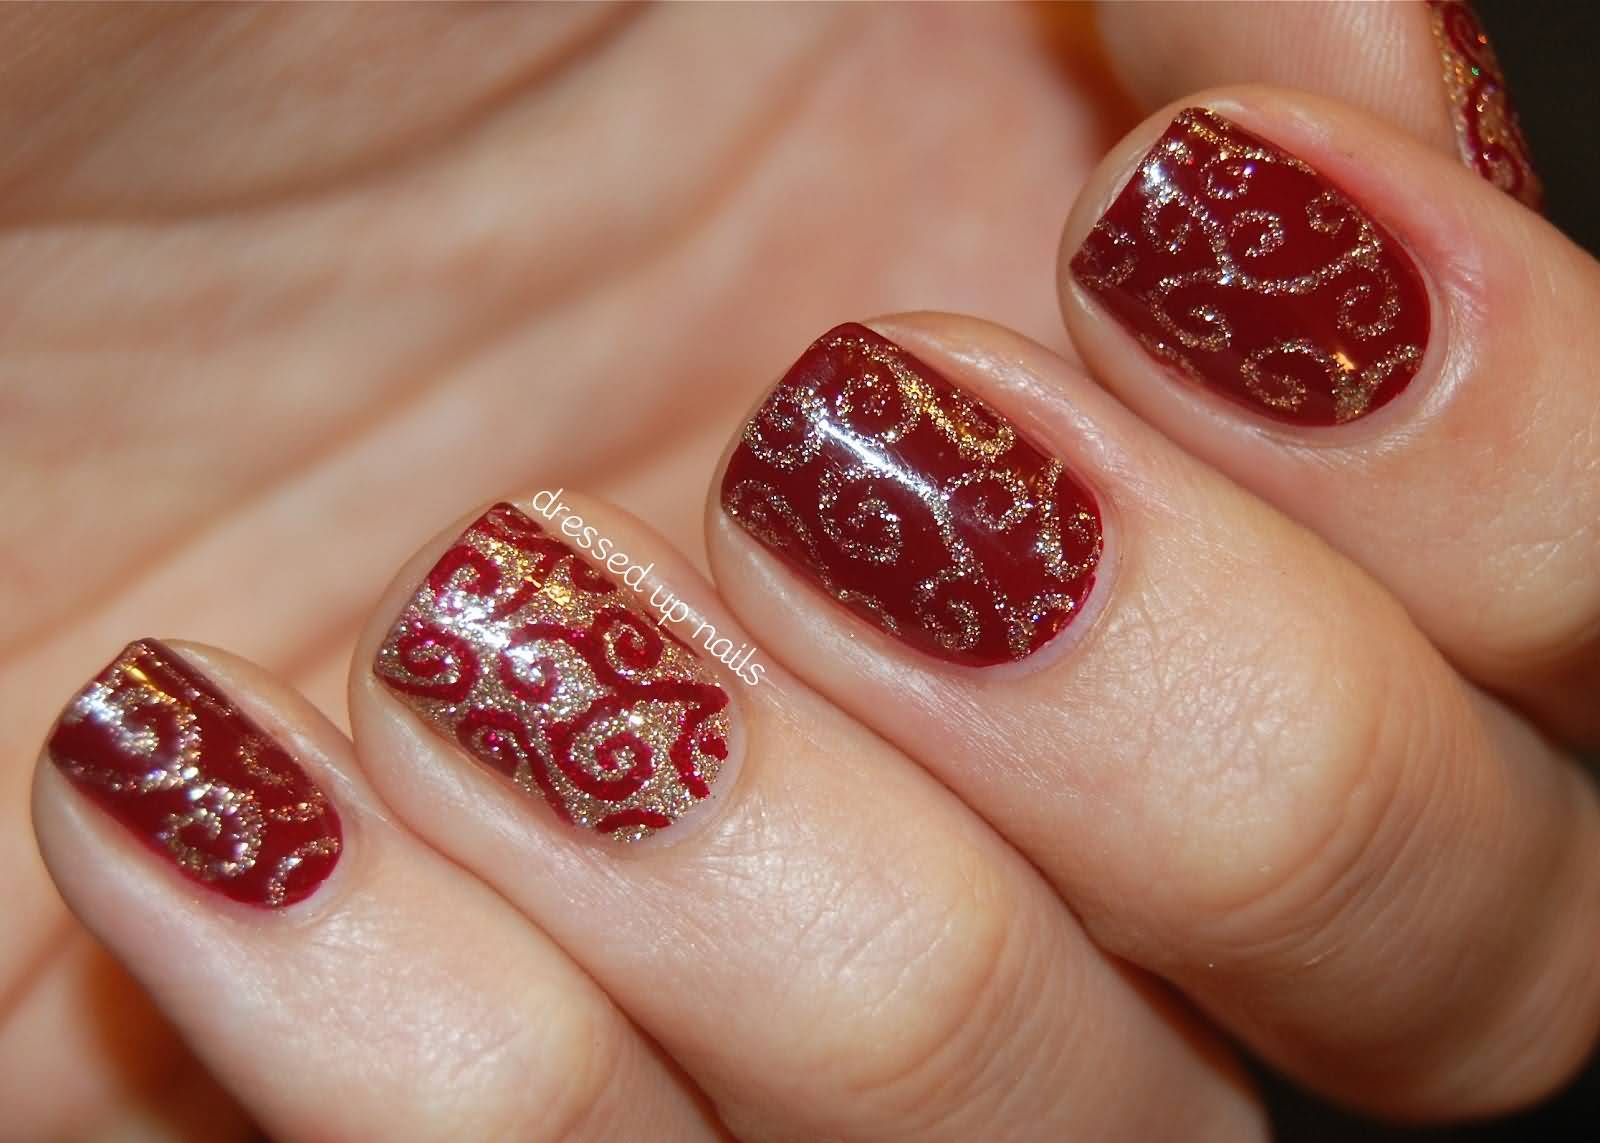 Red Nails With Gold Glitter gel Swirls Design Nail Art